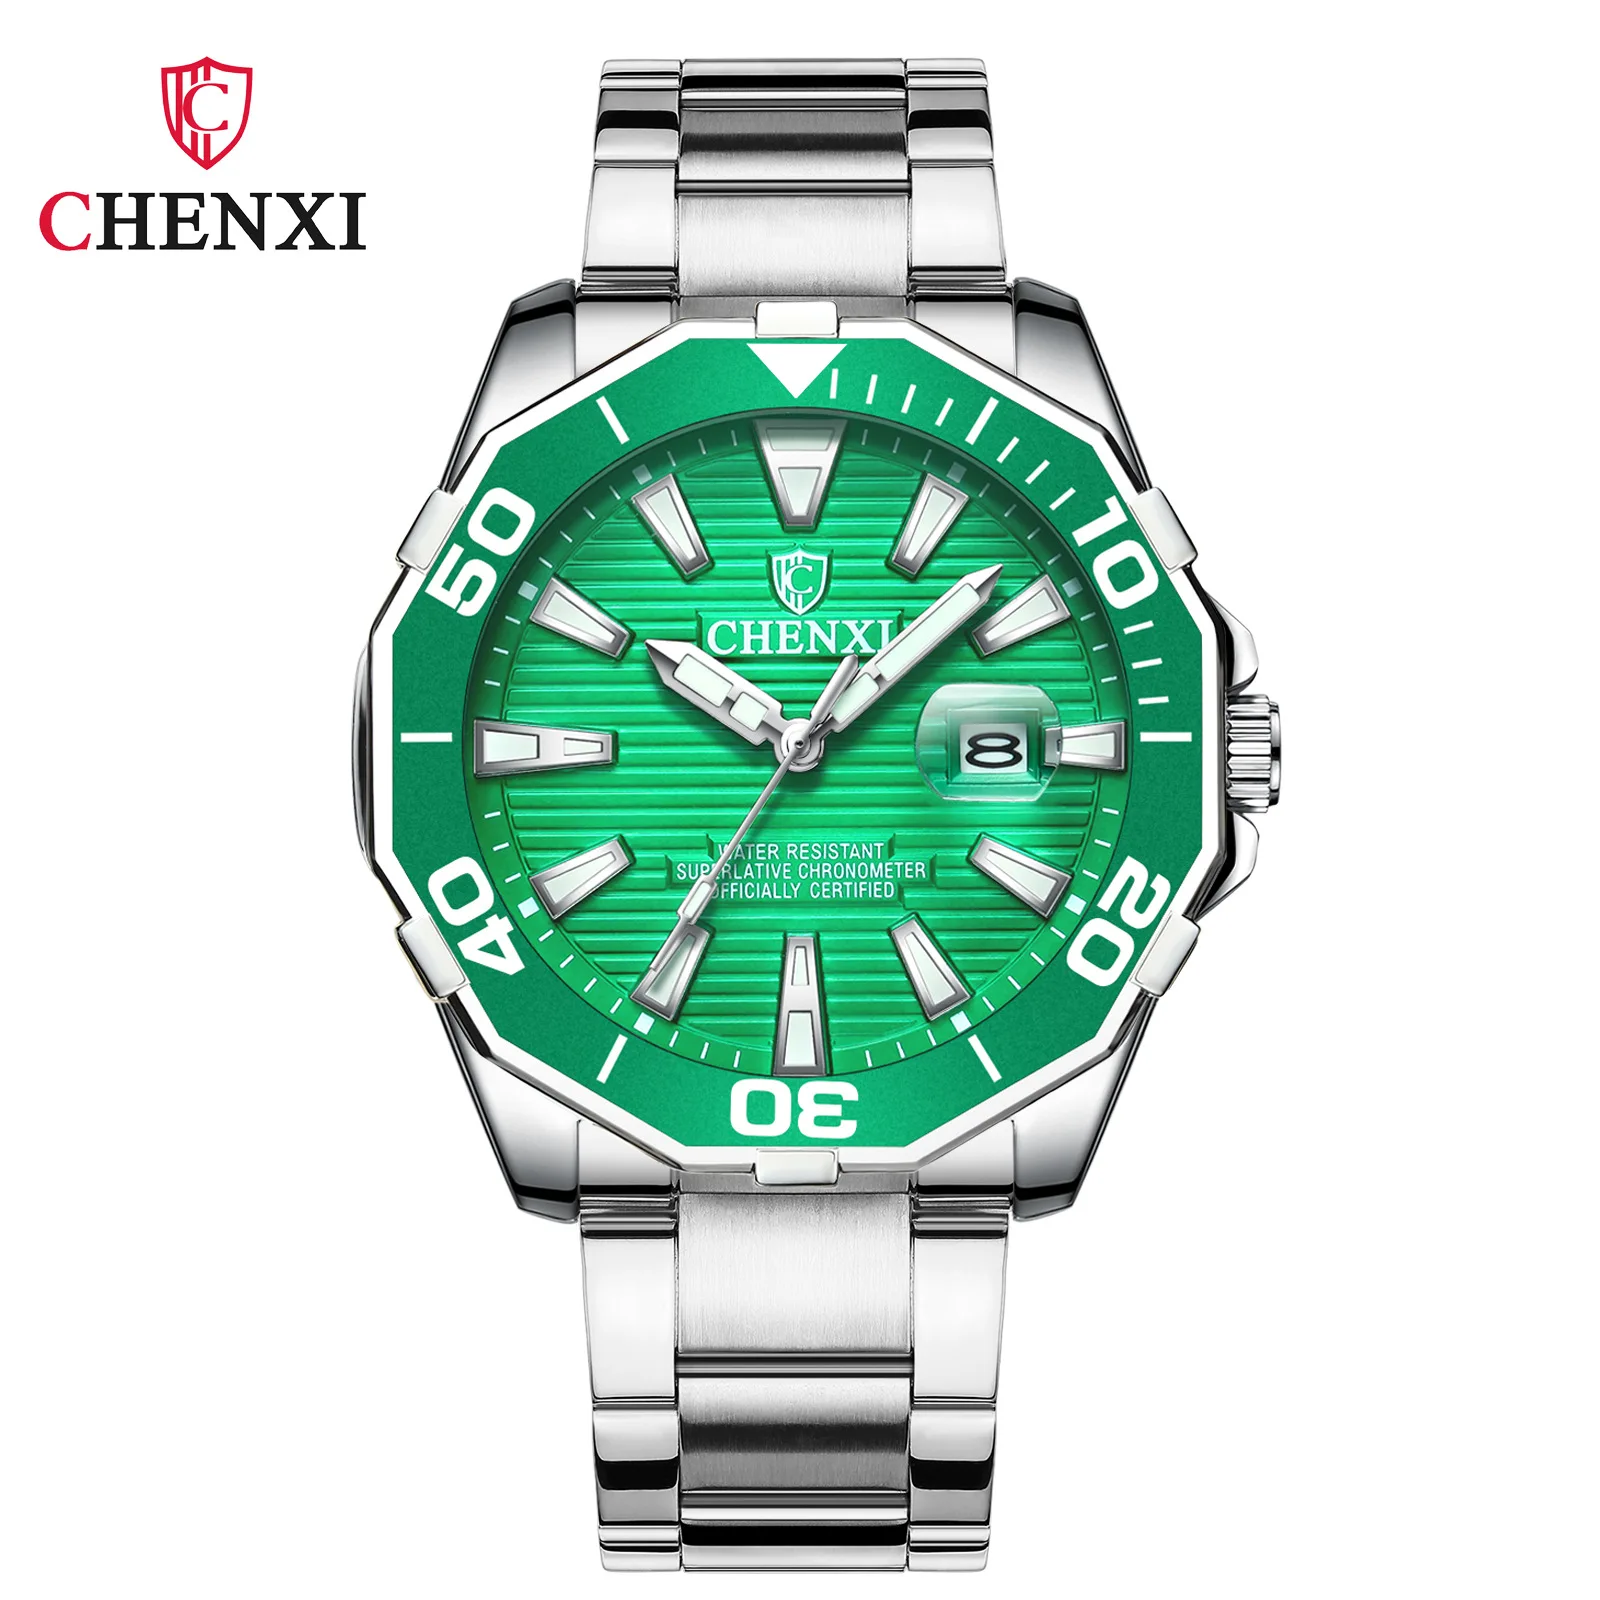 Fashion Hipster Watch Stainless Steel Business Quartz Watch Douyin Hot Selling Creative Watch Men enlarge